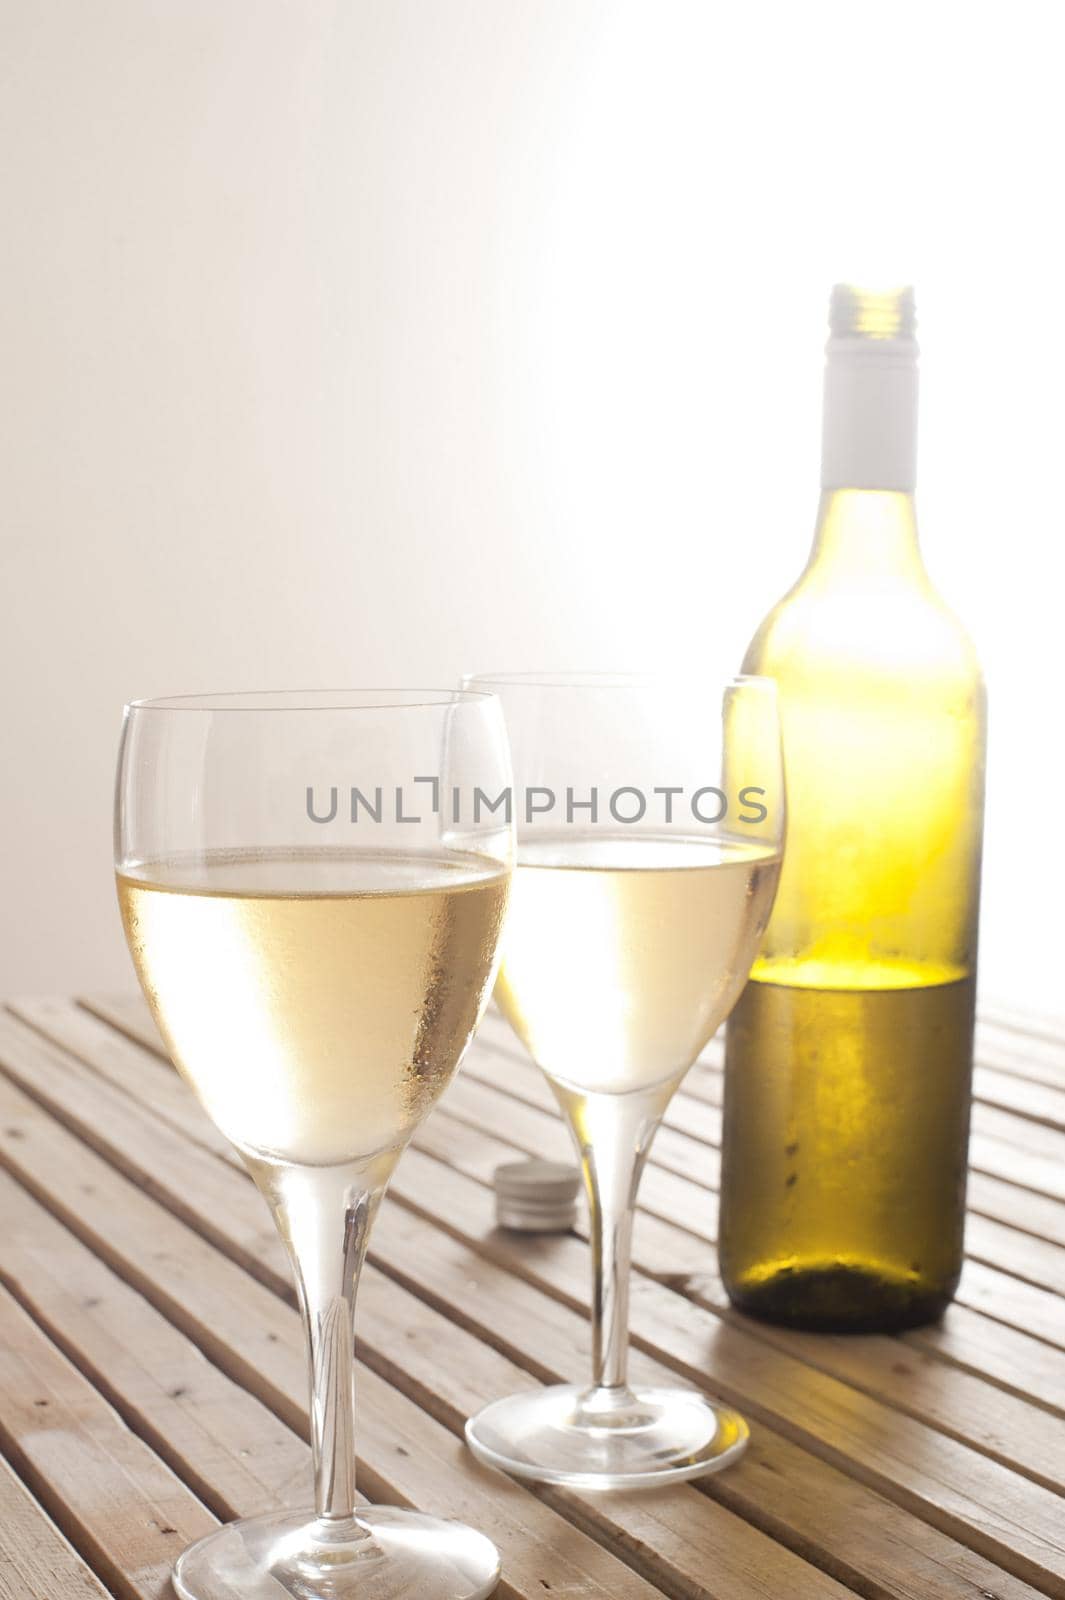 Two glasses of white wine and an unlabelled half full wine bottle standing together on a slatted wooden table with a bright glowing light behind the bottle and copyspace